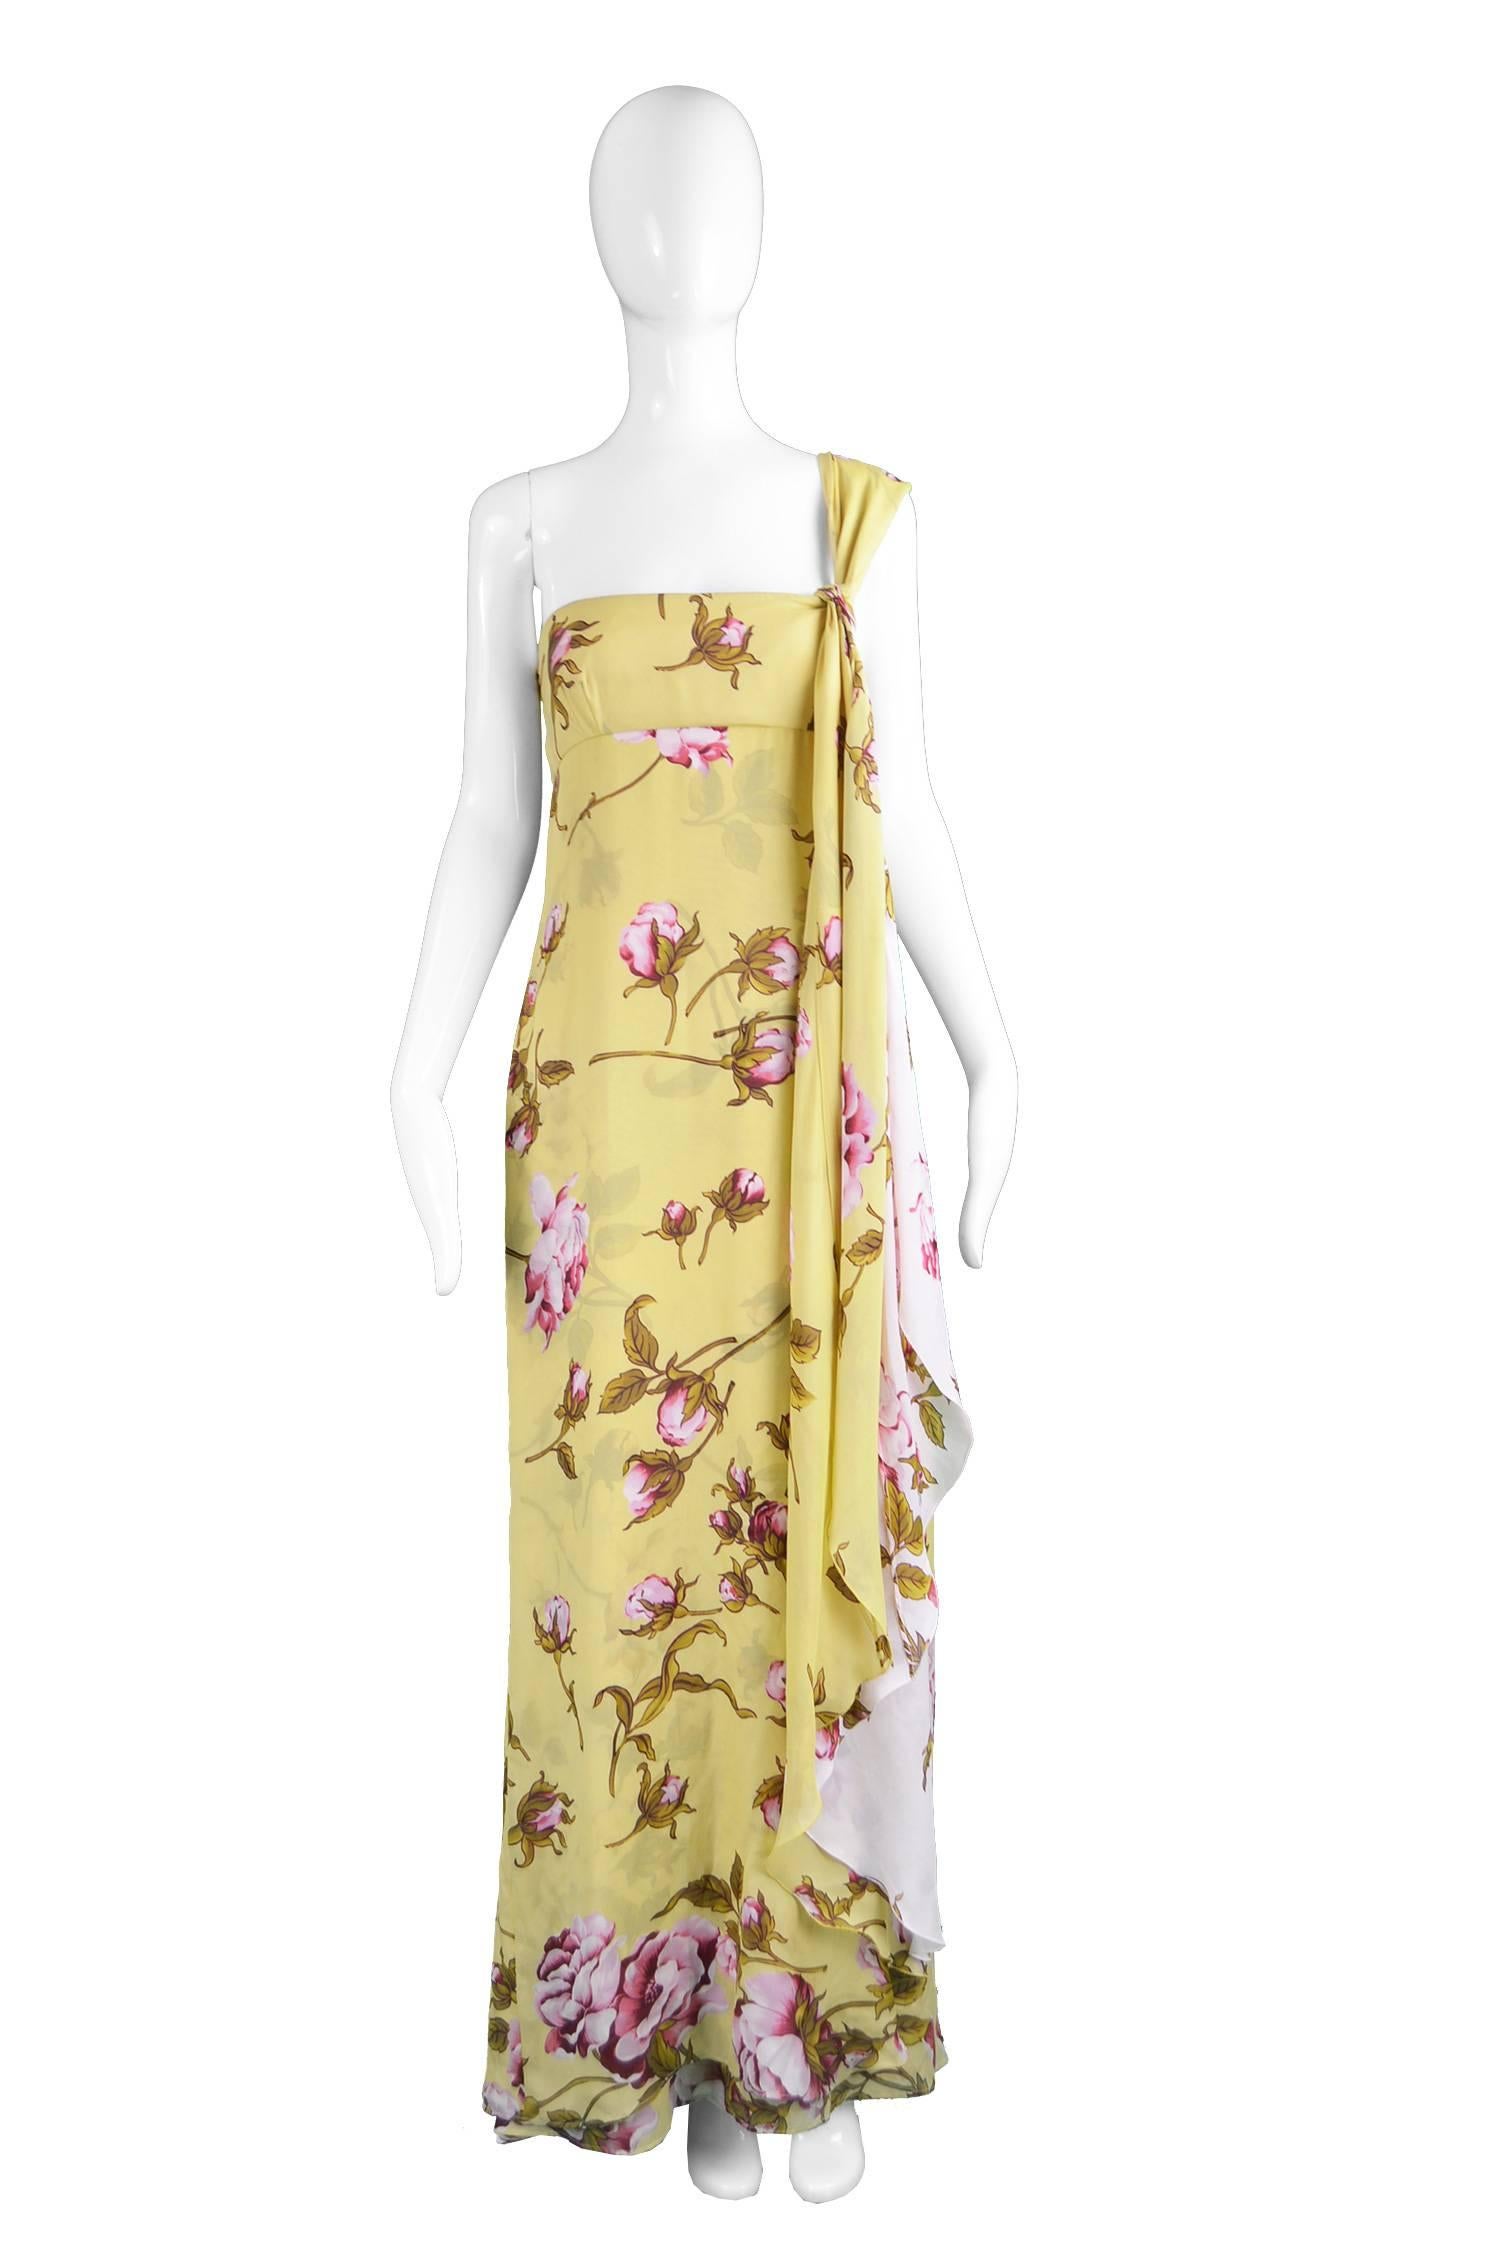 Valentino Yellow & Baby Pink Floral Silk One Shoulder Maxi Dress, Spring 2006

Please Click +CONTINUE READING to see measurements, description and condition. 

Size: UK 12 / US 8 / EU 40. Please check measurements.
Bust - 36” / 91cm
Waist - 30”